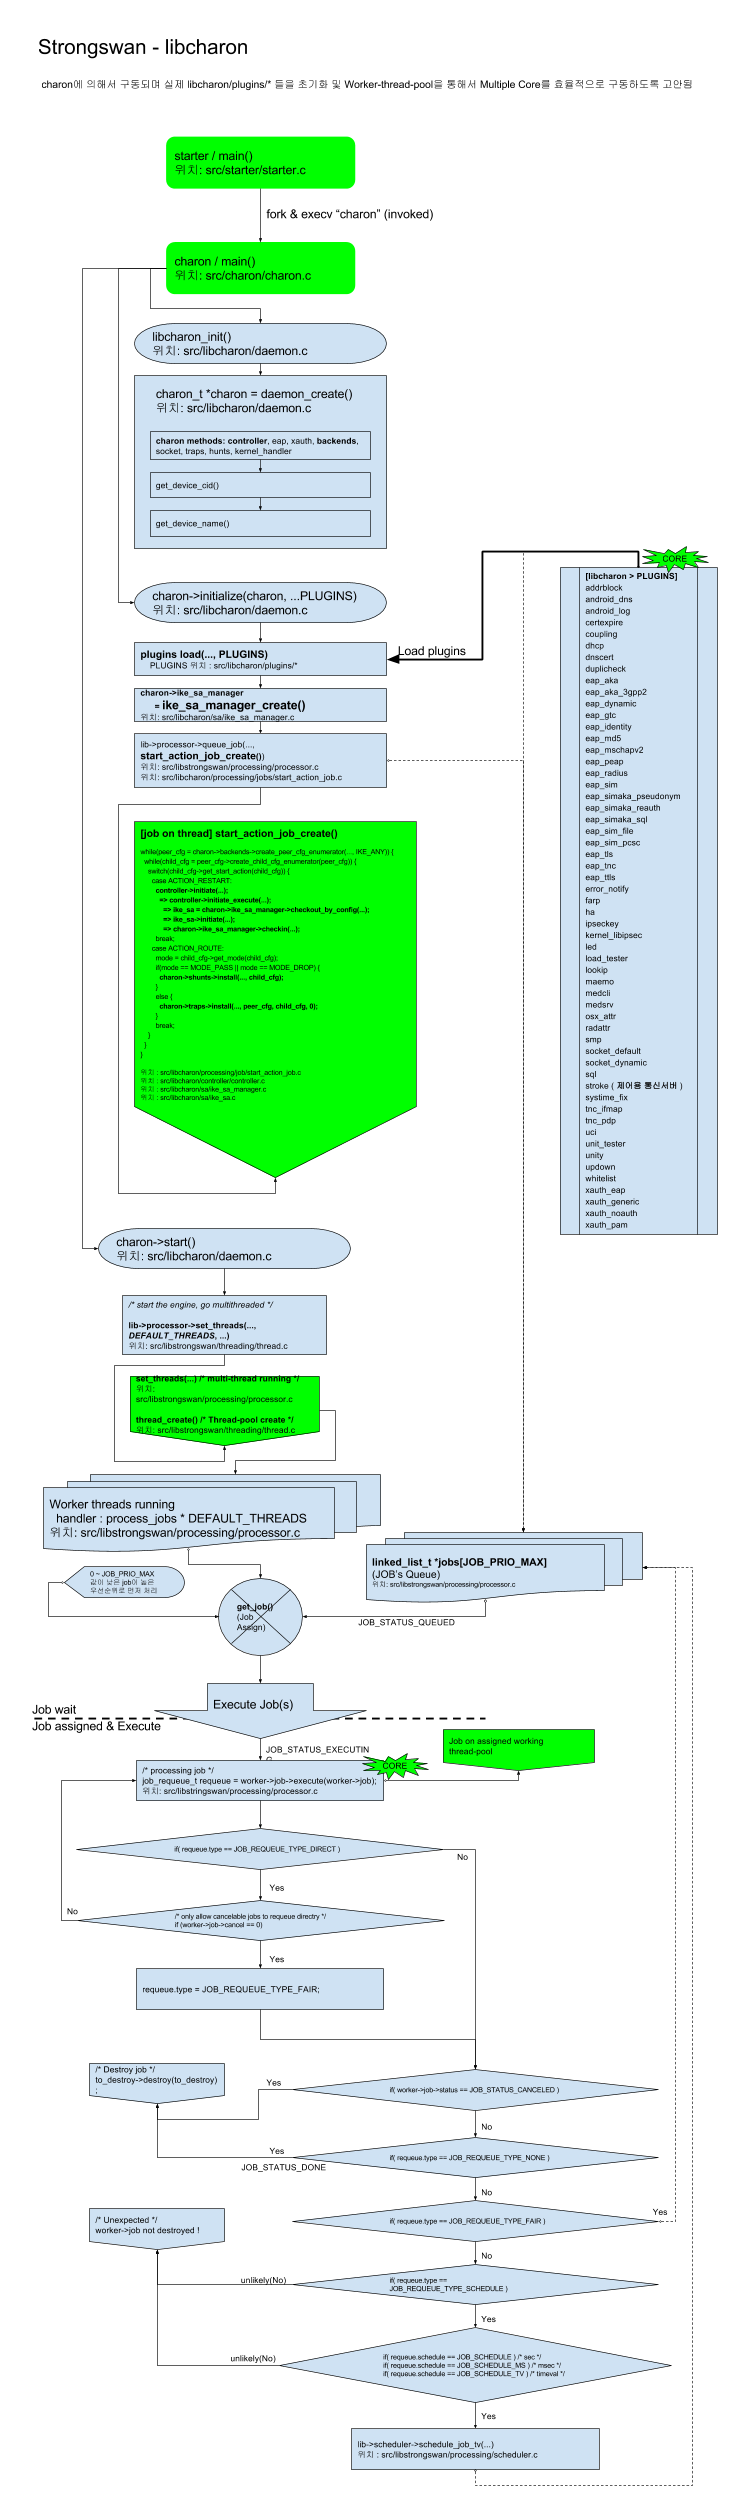 03-analysis-flow-v1-20161229-strongswan-libcharon.png